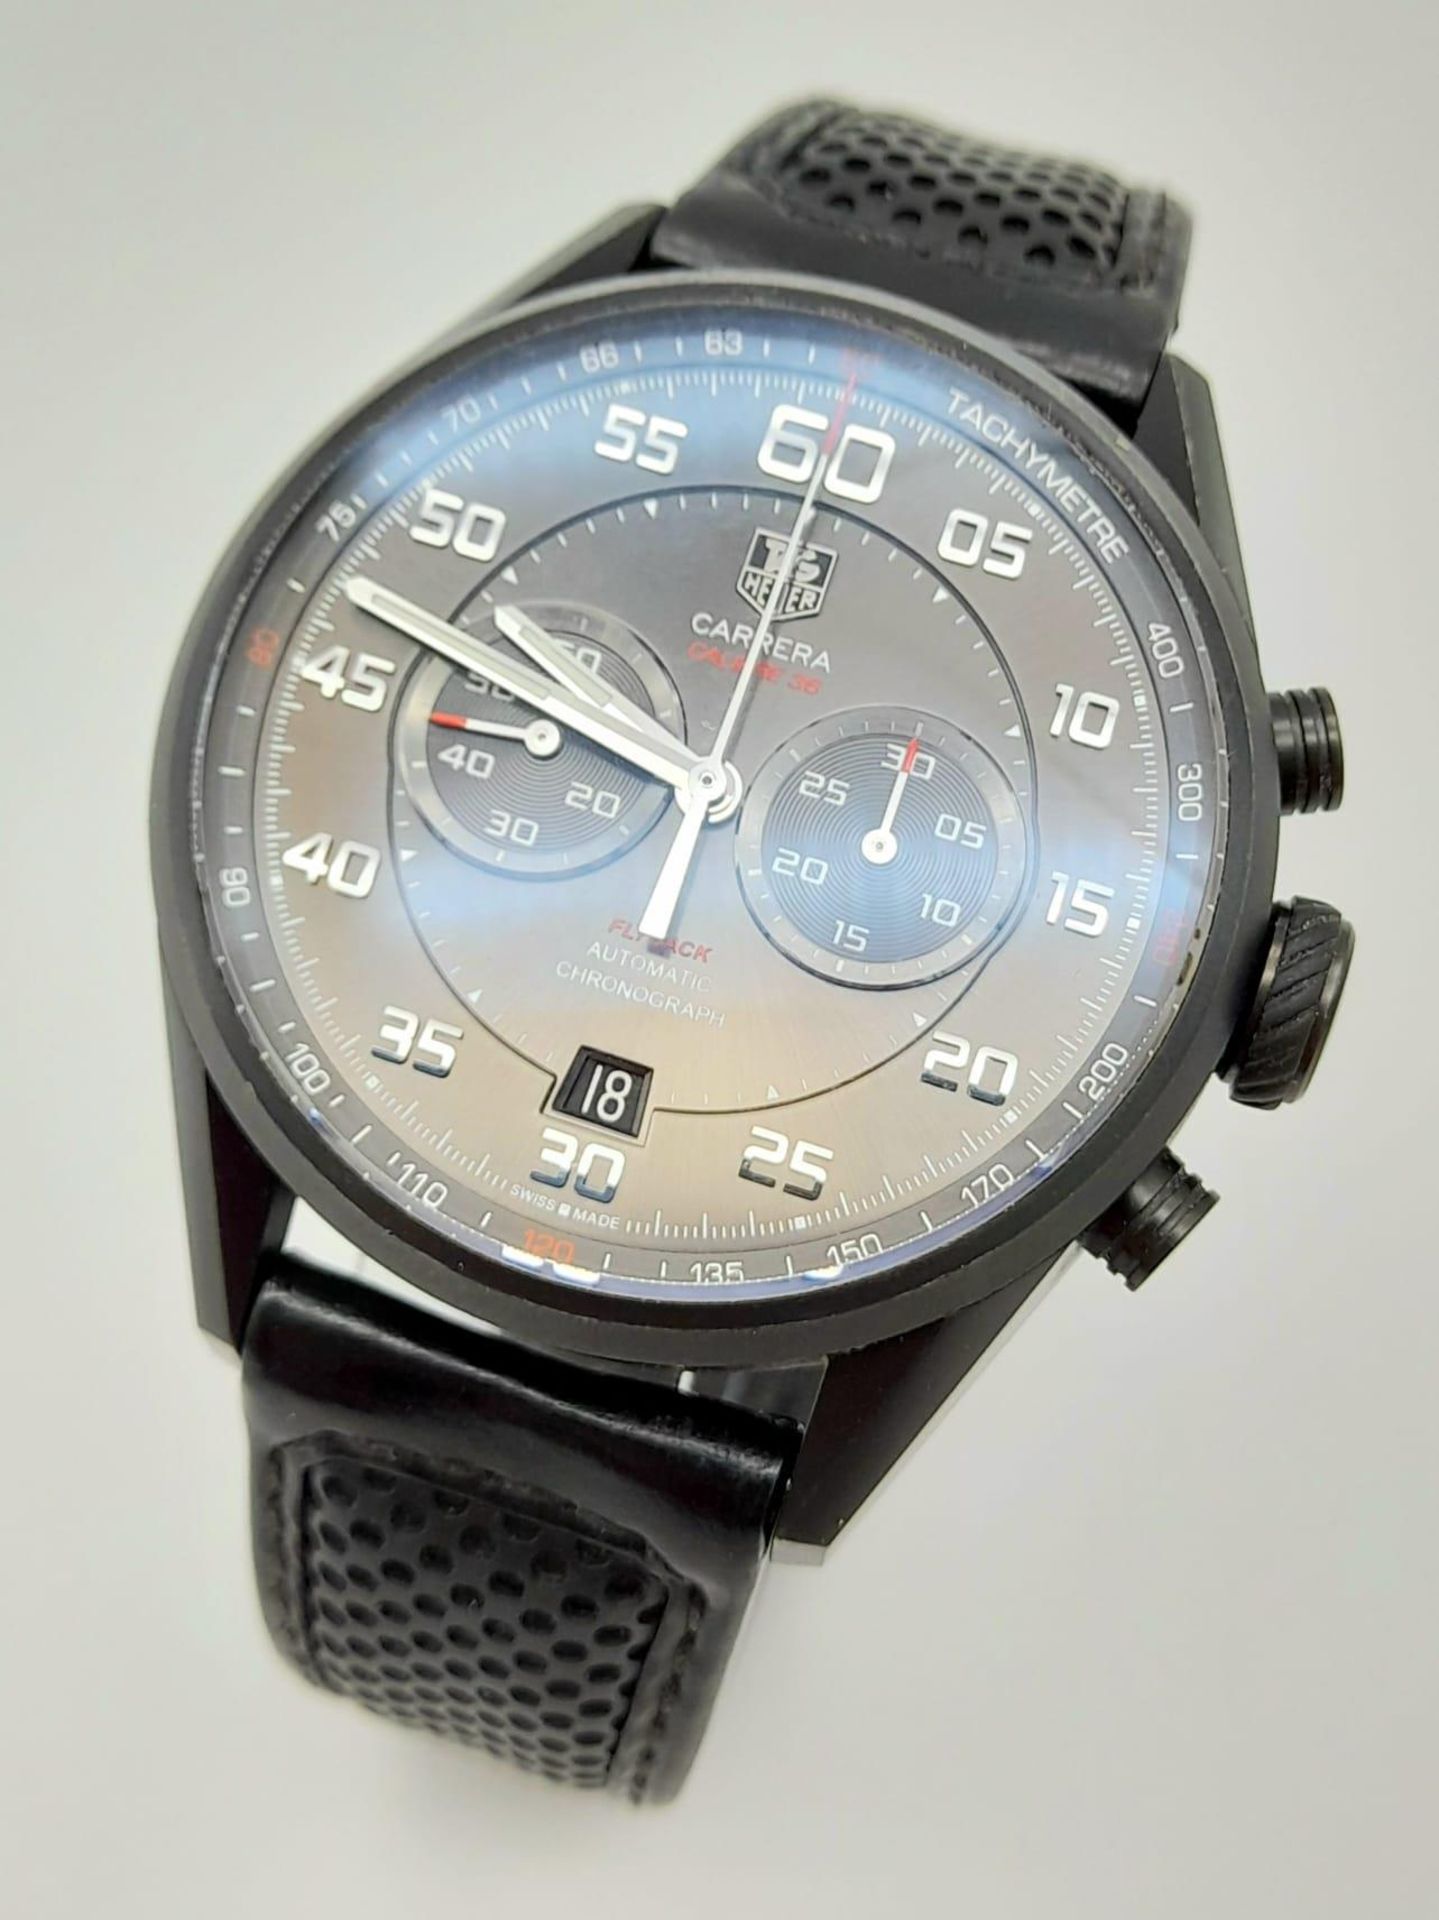 A Tag Heuer Carrera Flyback Automatic Chronograph Gents Watch. Black leather/rubber strap. Case -